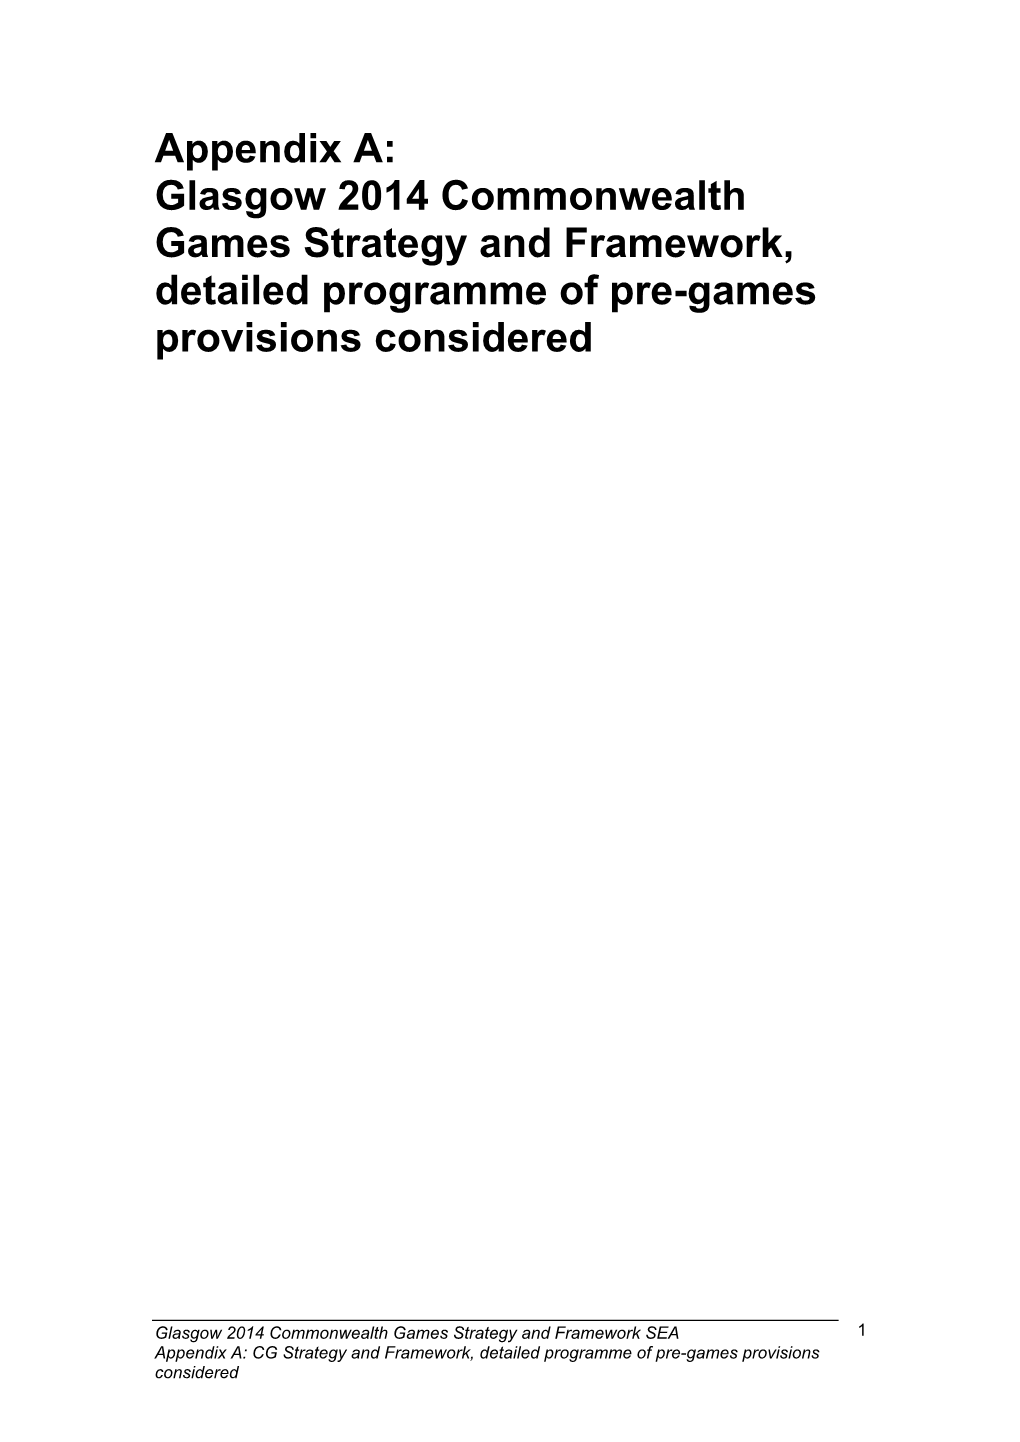 Glasgow 2014 Commonwealth Games Strategy and Framework, Detailed Programme of Pre-Games Provisions Considered